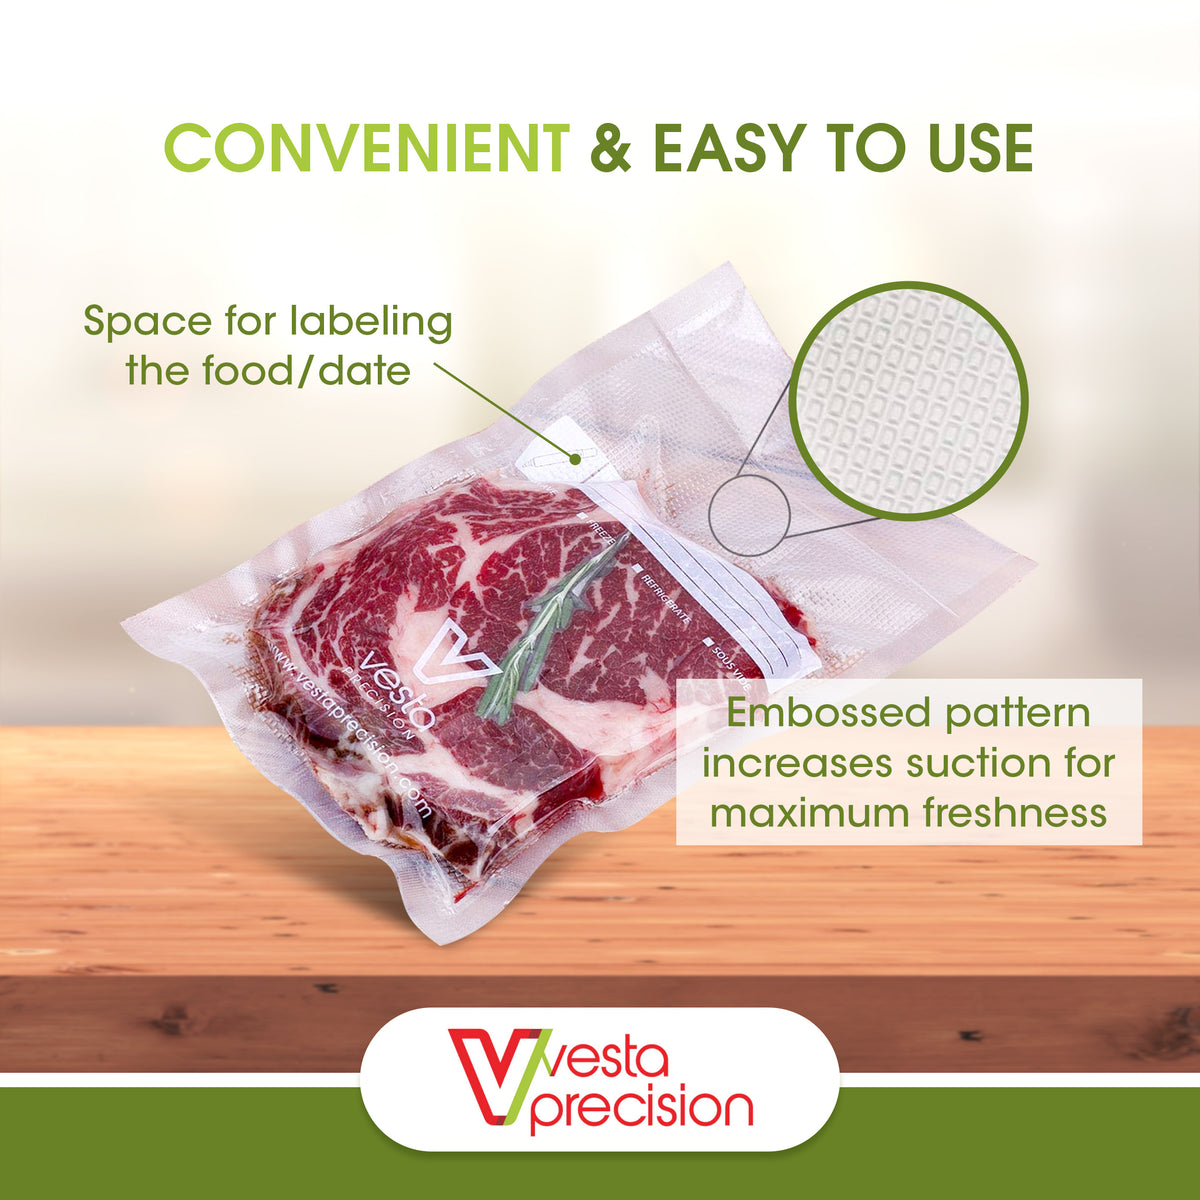  VestaEco Compostable Vacuum Seal Bags, Extend Freshness, Embossed, Certified Compostable, Reduce Waste, 8 x 12 Inches